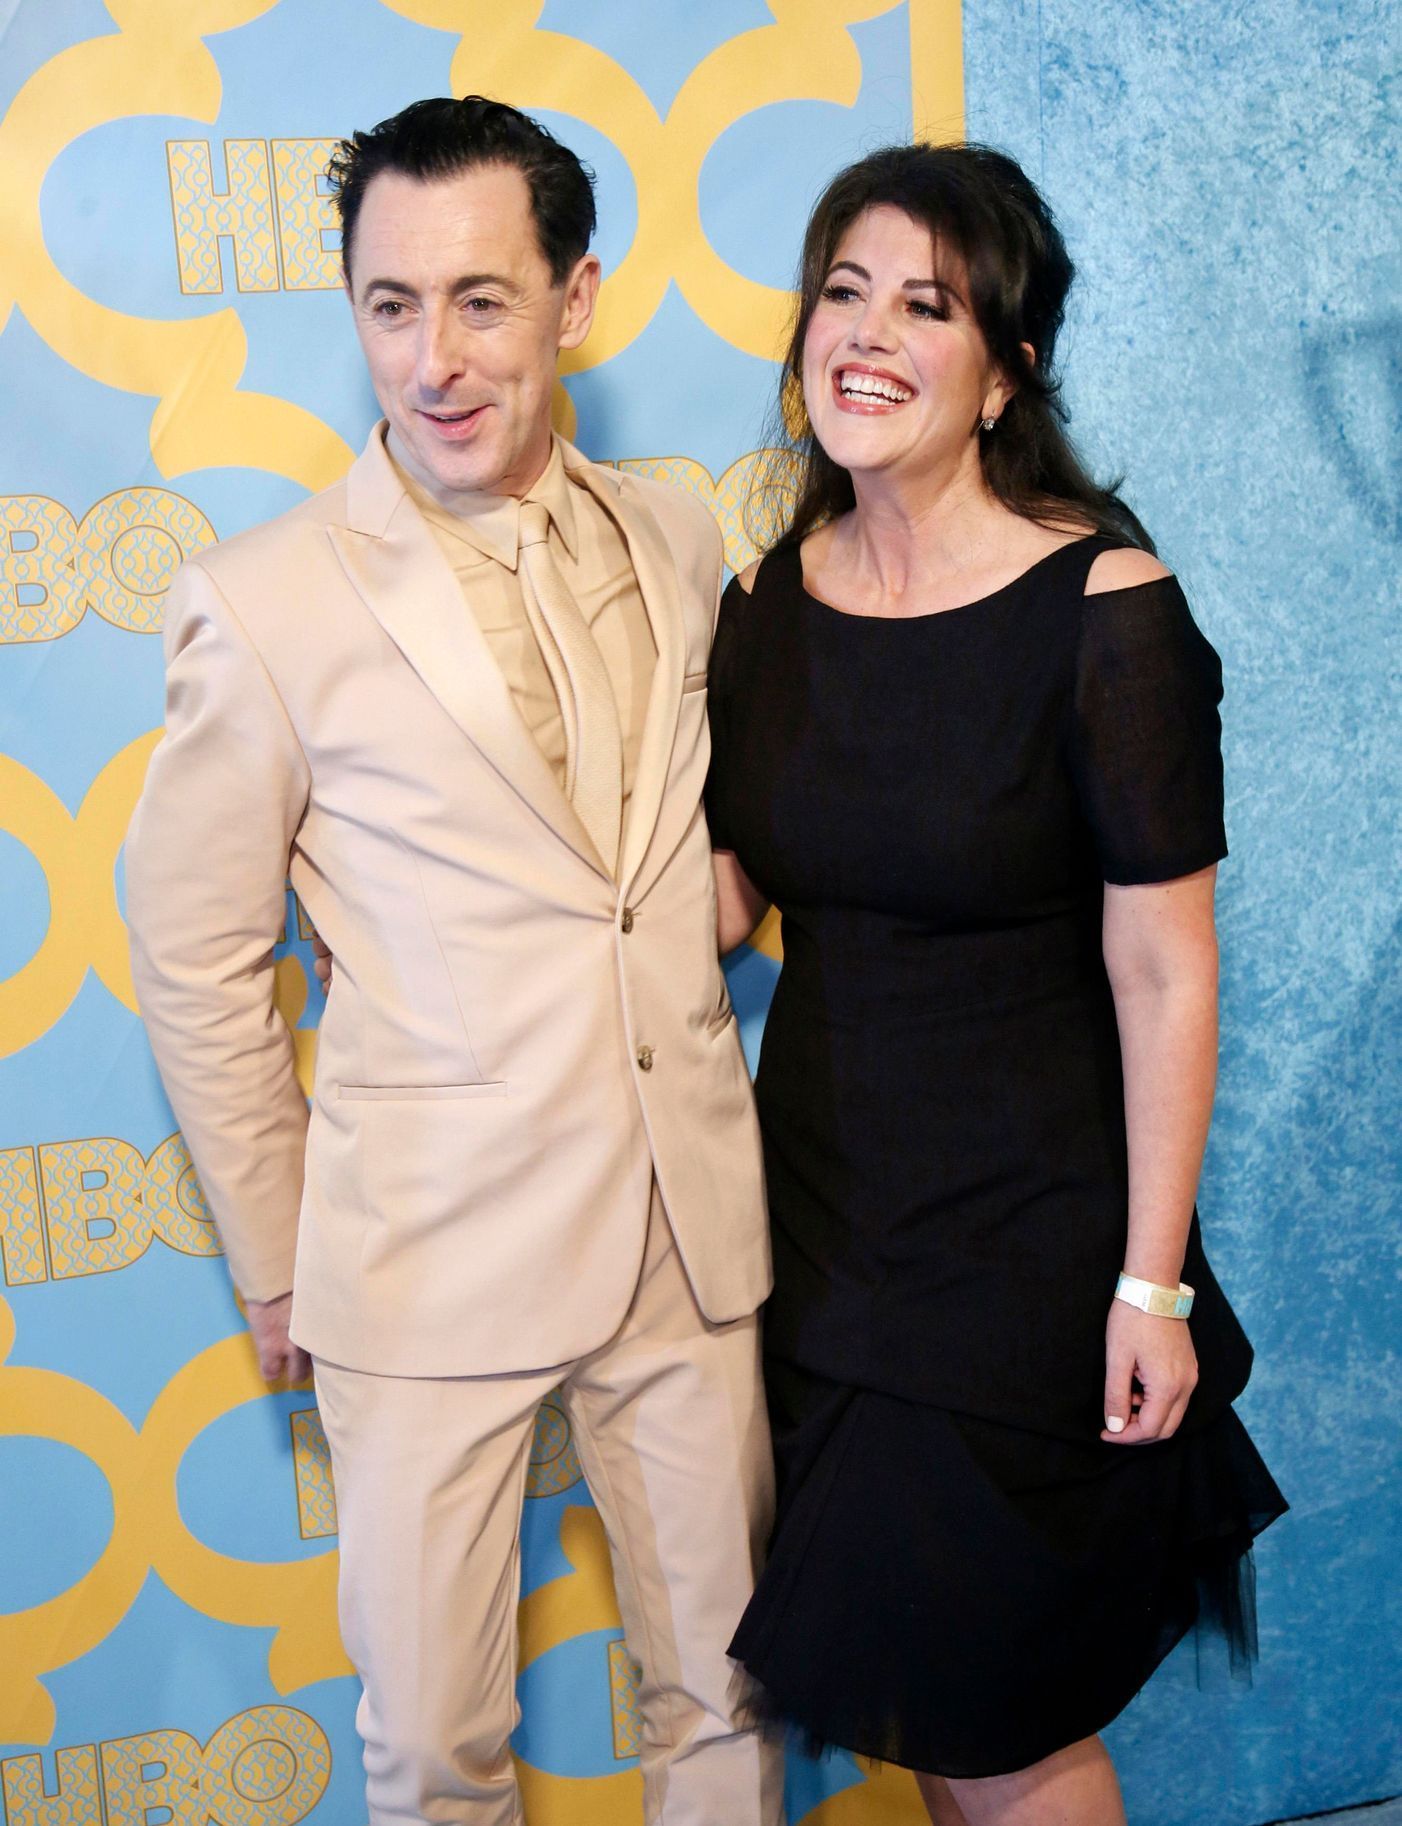 Actor Alan Cummings and Monica Lewinsky pose at the HBO after-party after the 72nd annual Golden Globe Awards in Beverly Hills